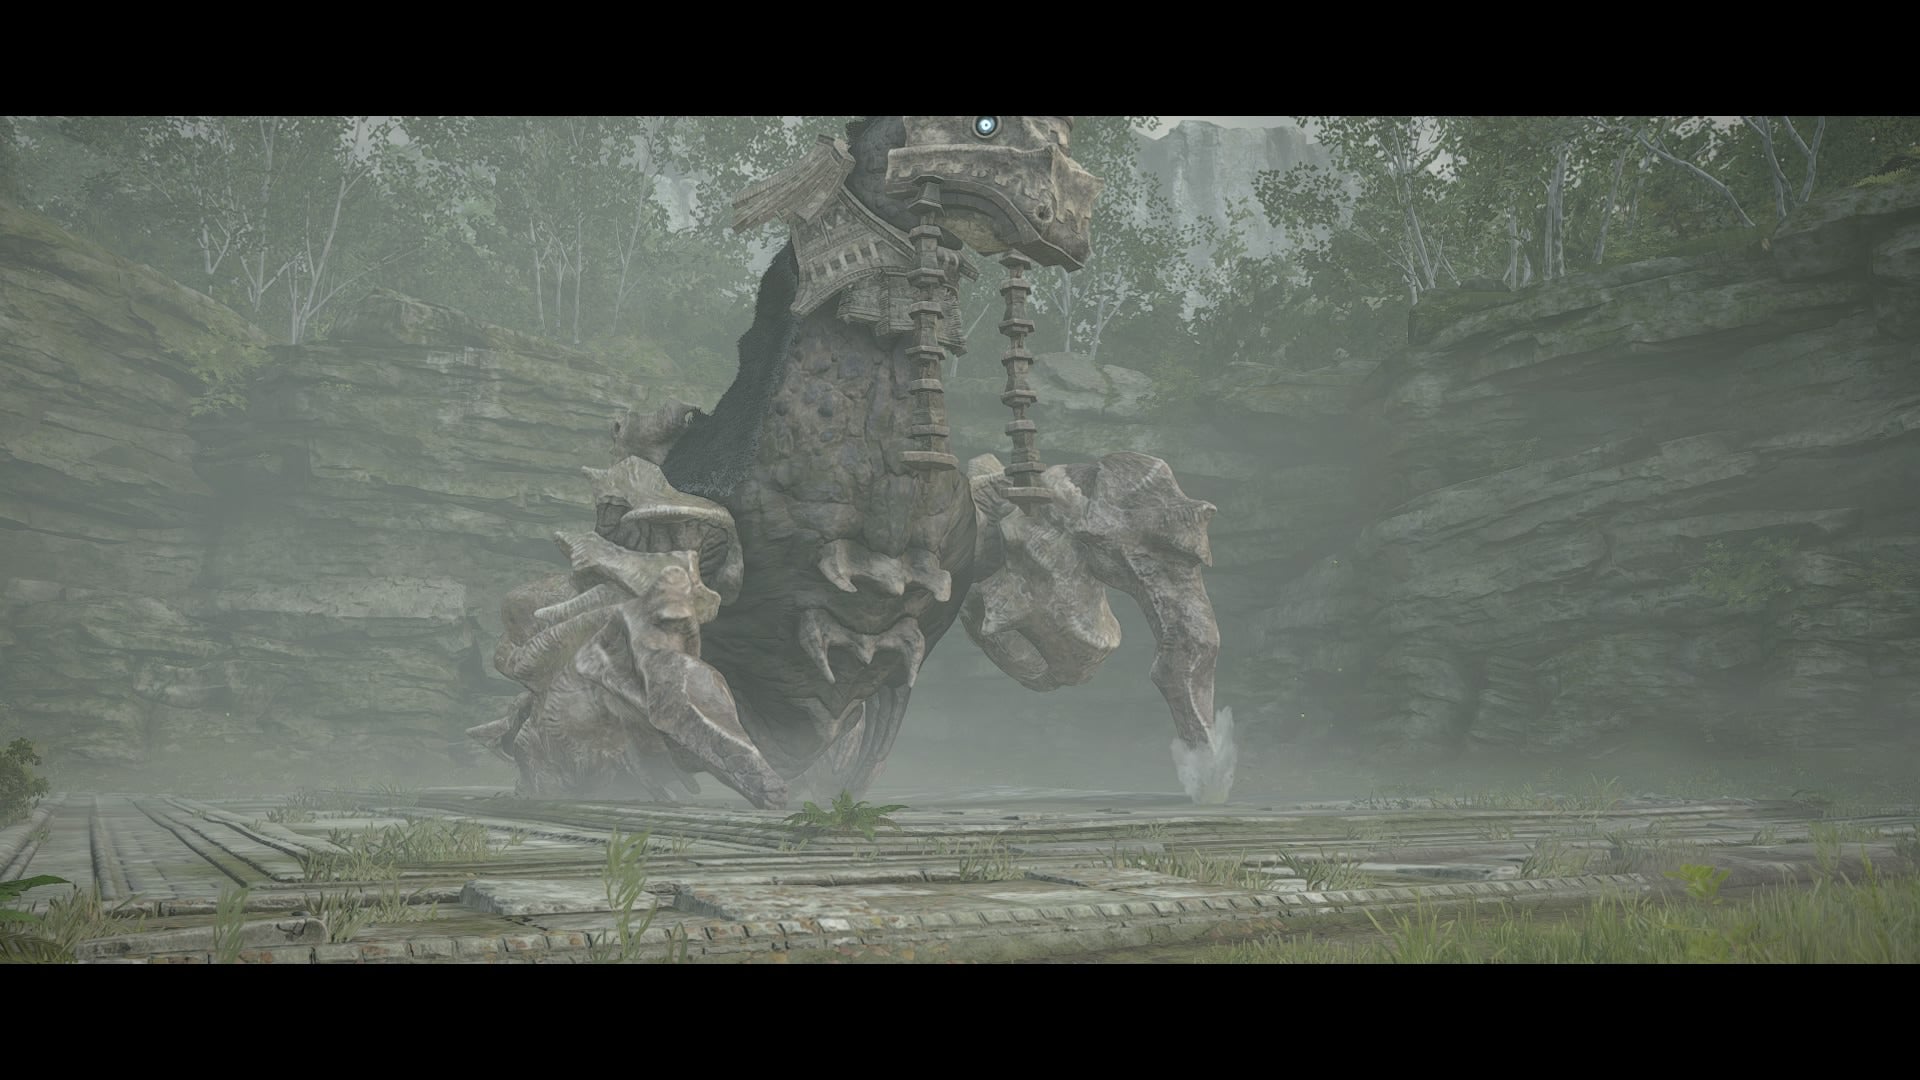 Image for Shadow of the Colossus: how to beat Colossus 4 - Gravestone Horse